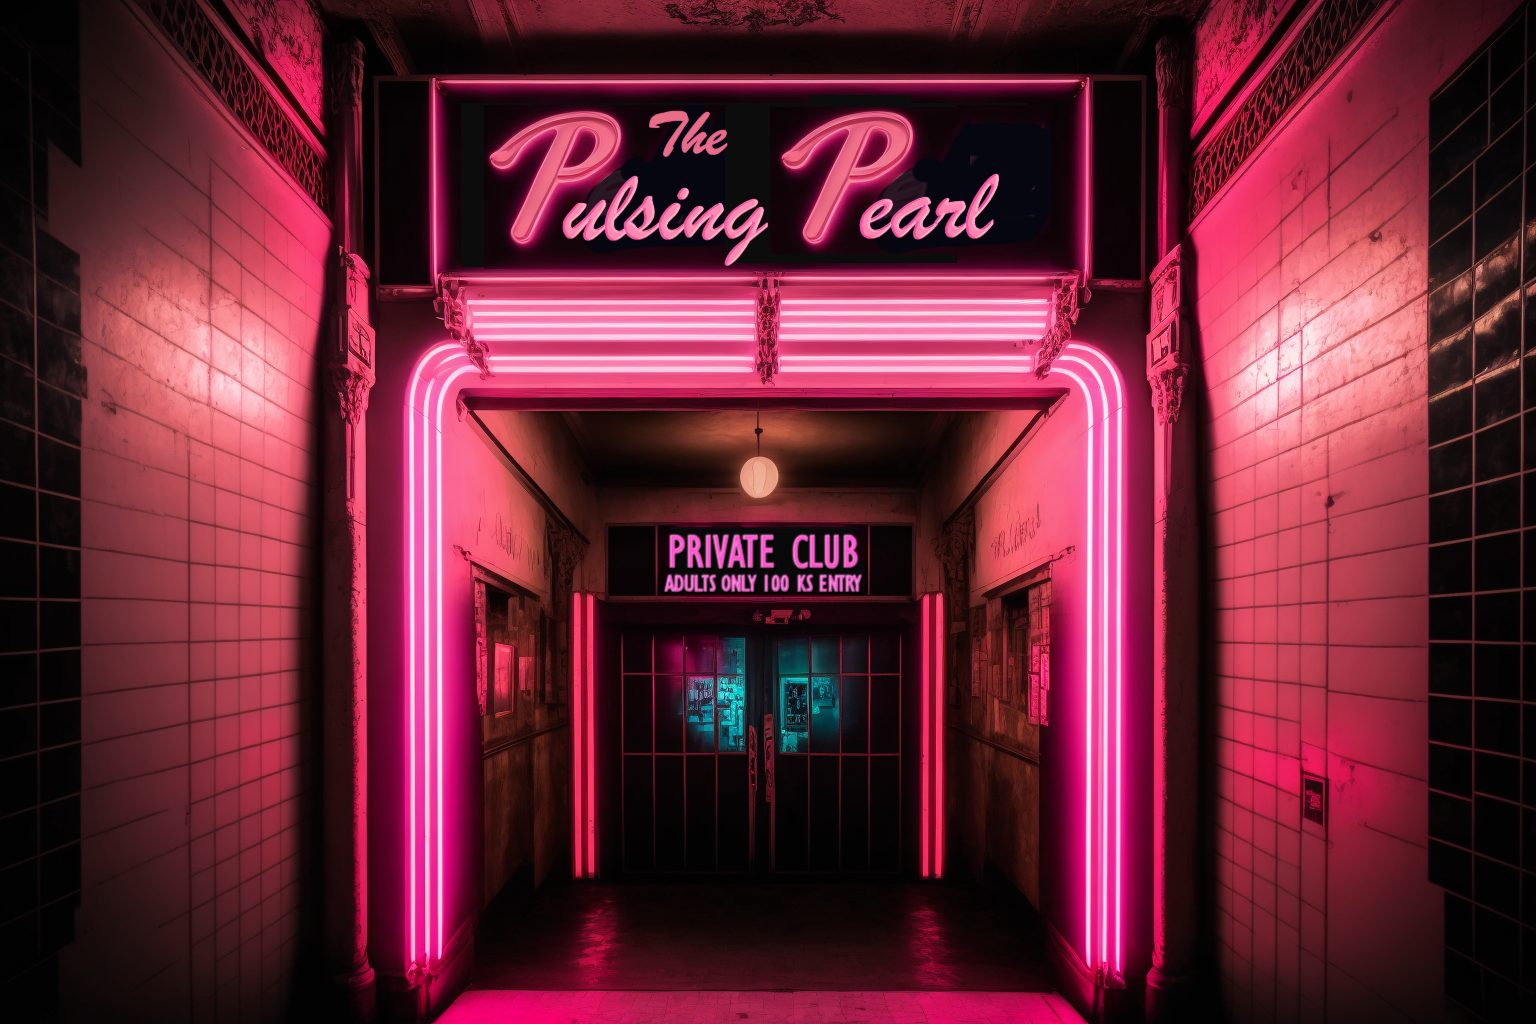 Storefront -The Pulsing Pearl